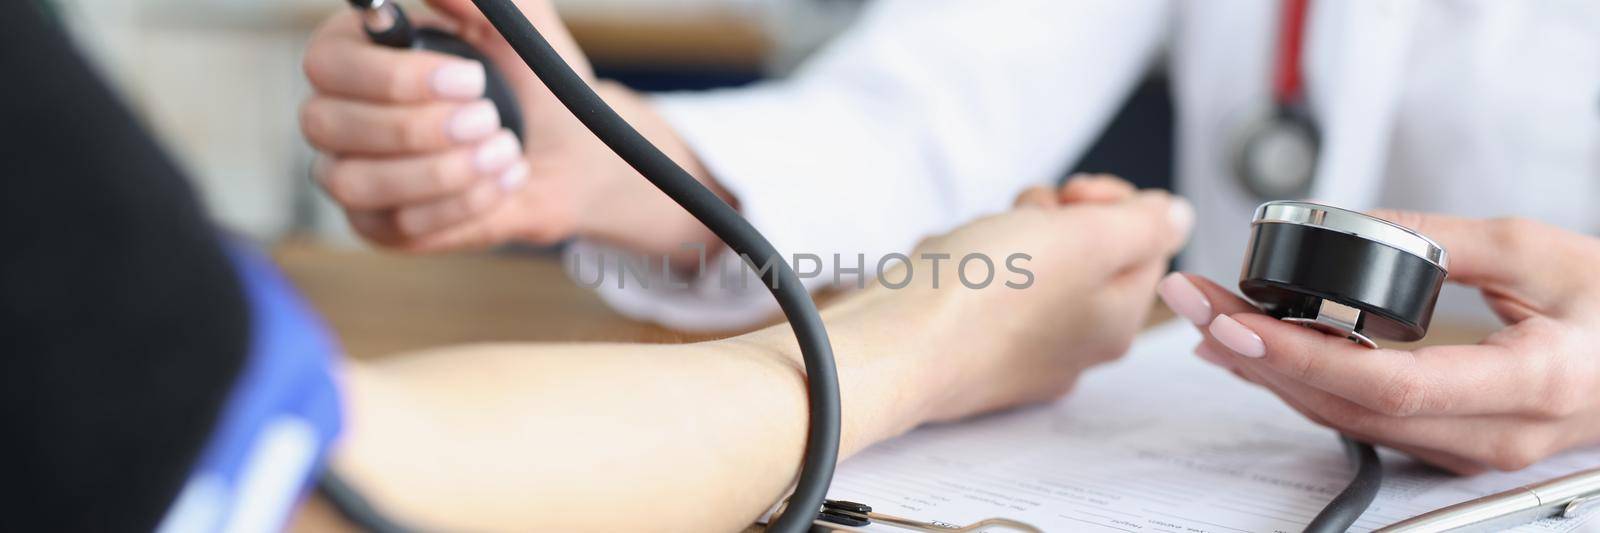 Close-up of female therapist taking blood pressure. Practitioner holding tonometer and checking blood pressure of woman patient. Medical examination, treatment and medicine concept